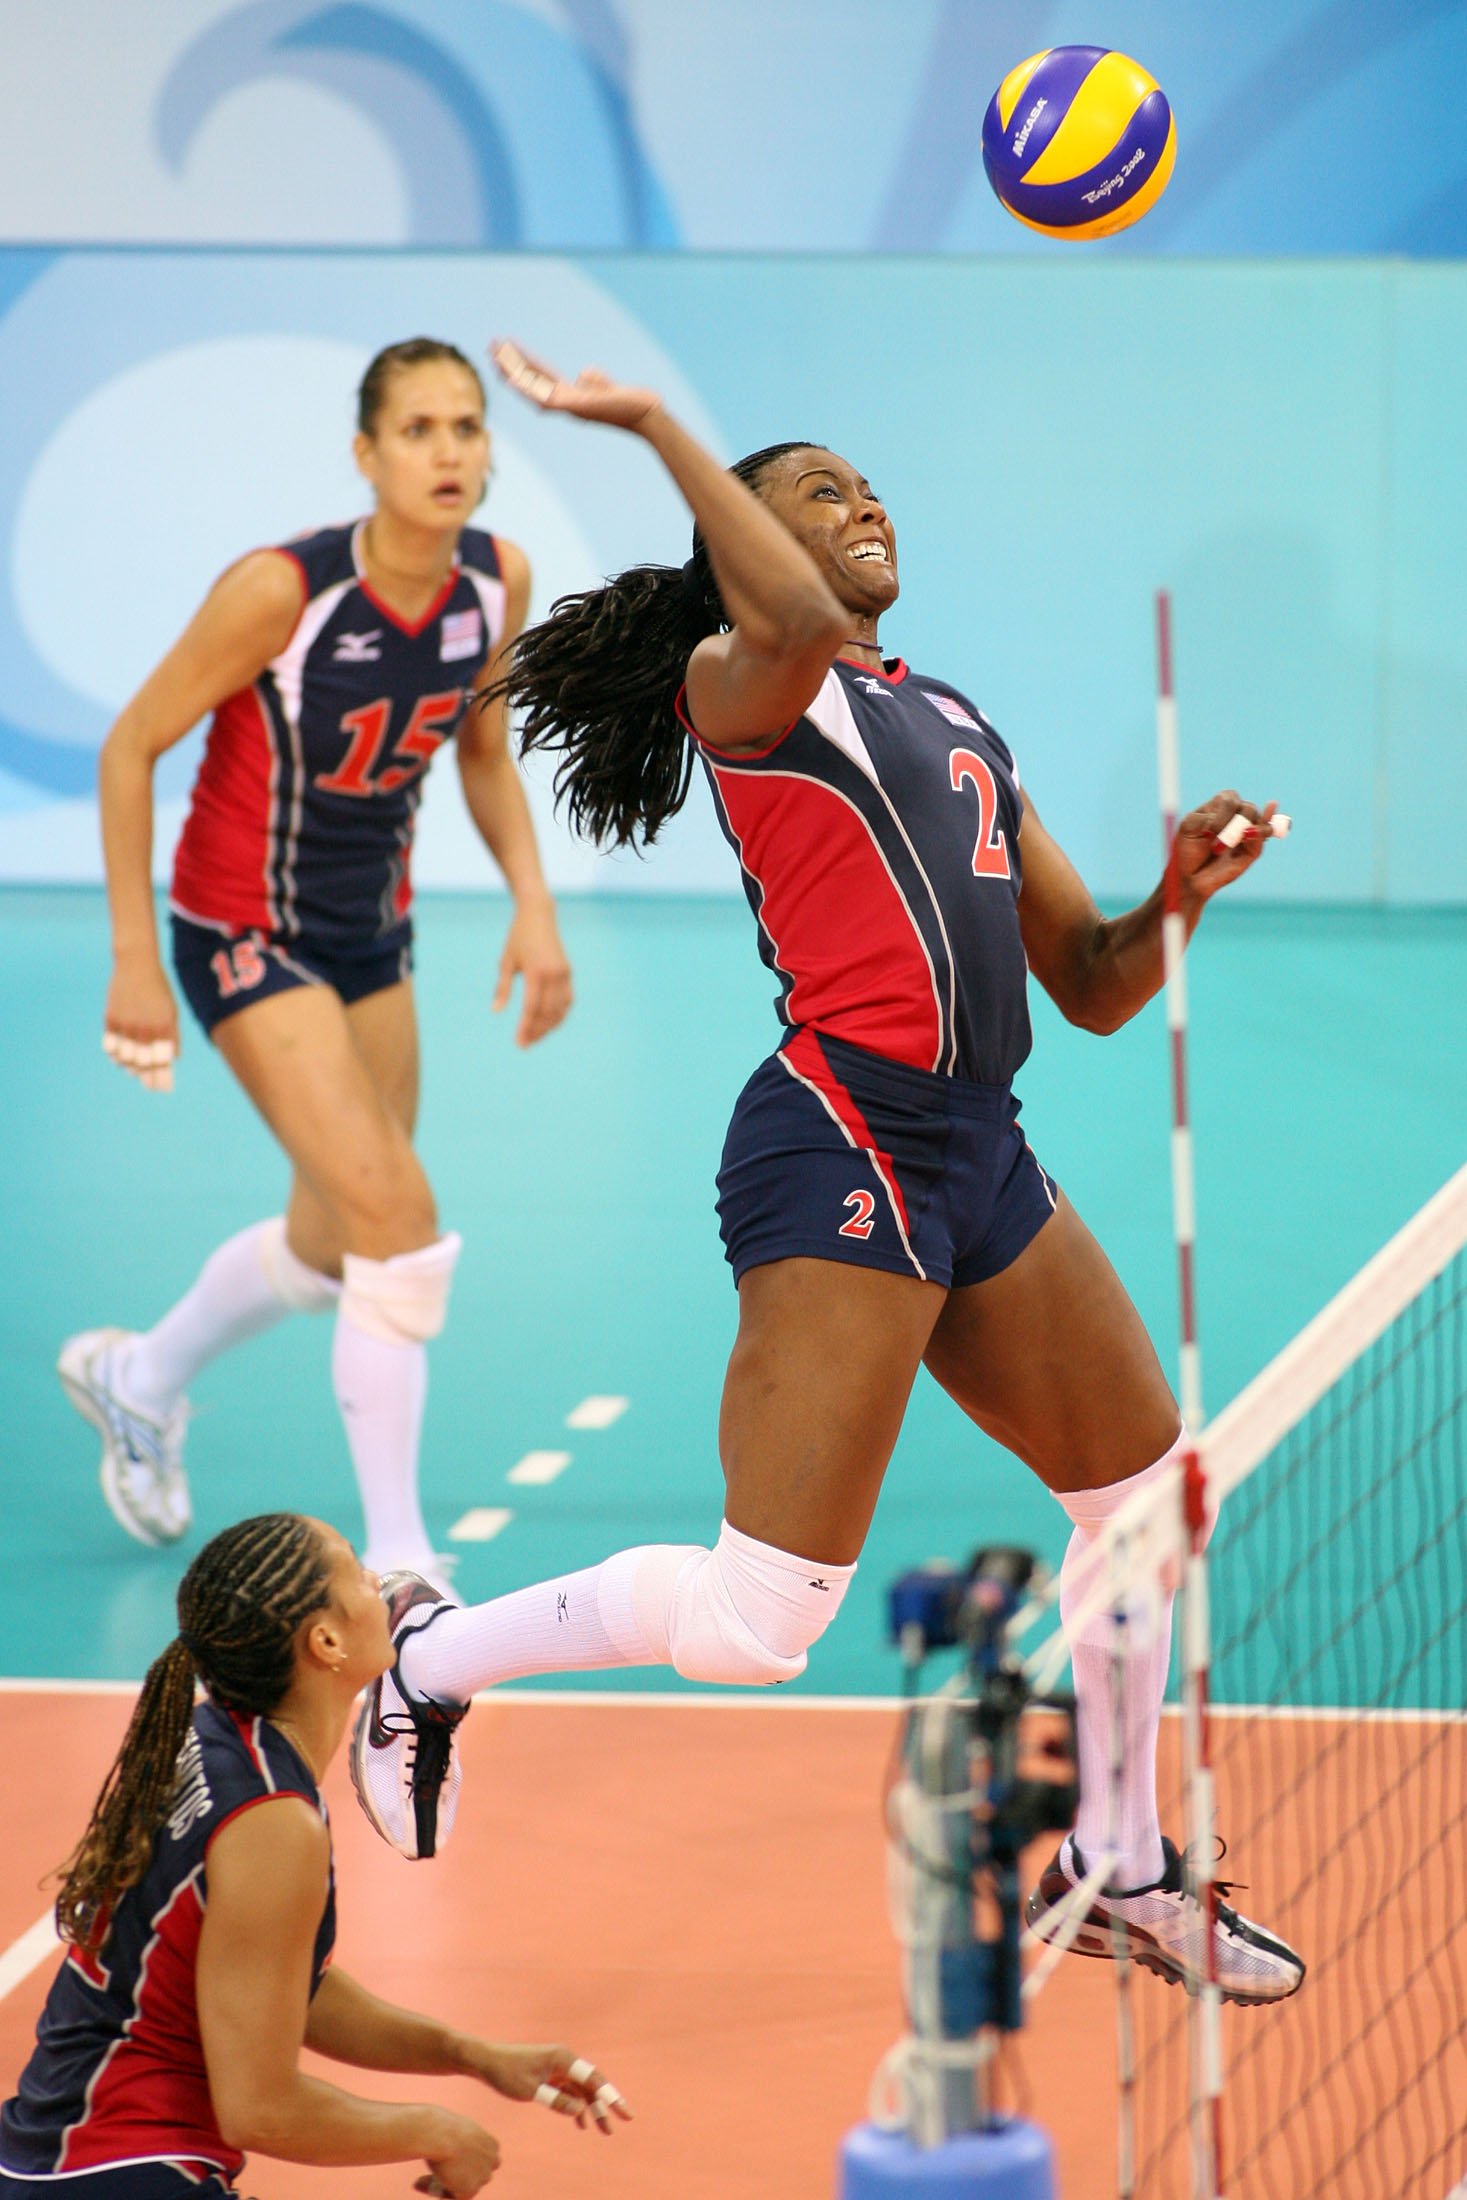 Danielle Scott Arruda is the first American, male or female, to play volleyball in five Olympic games.